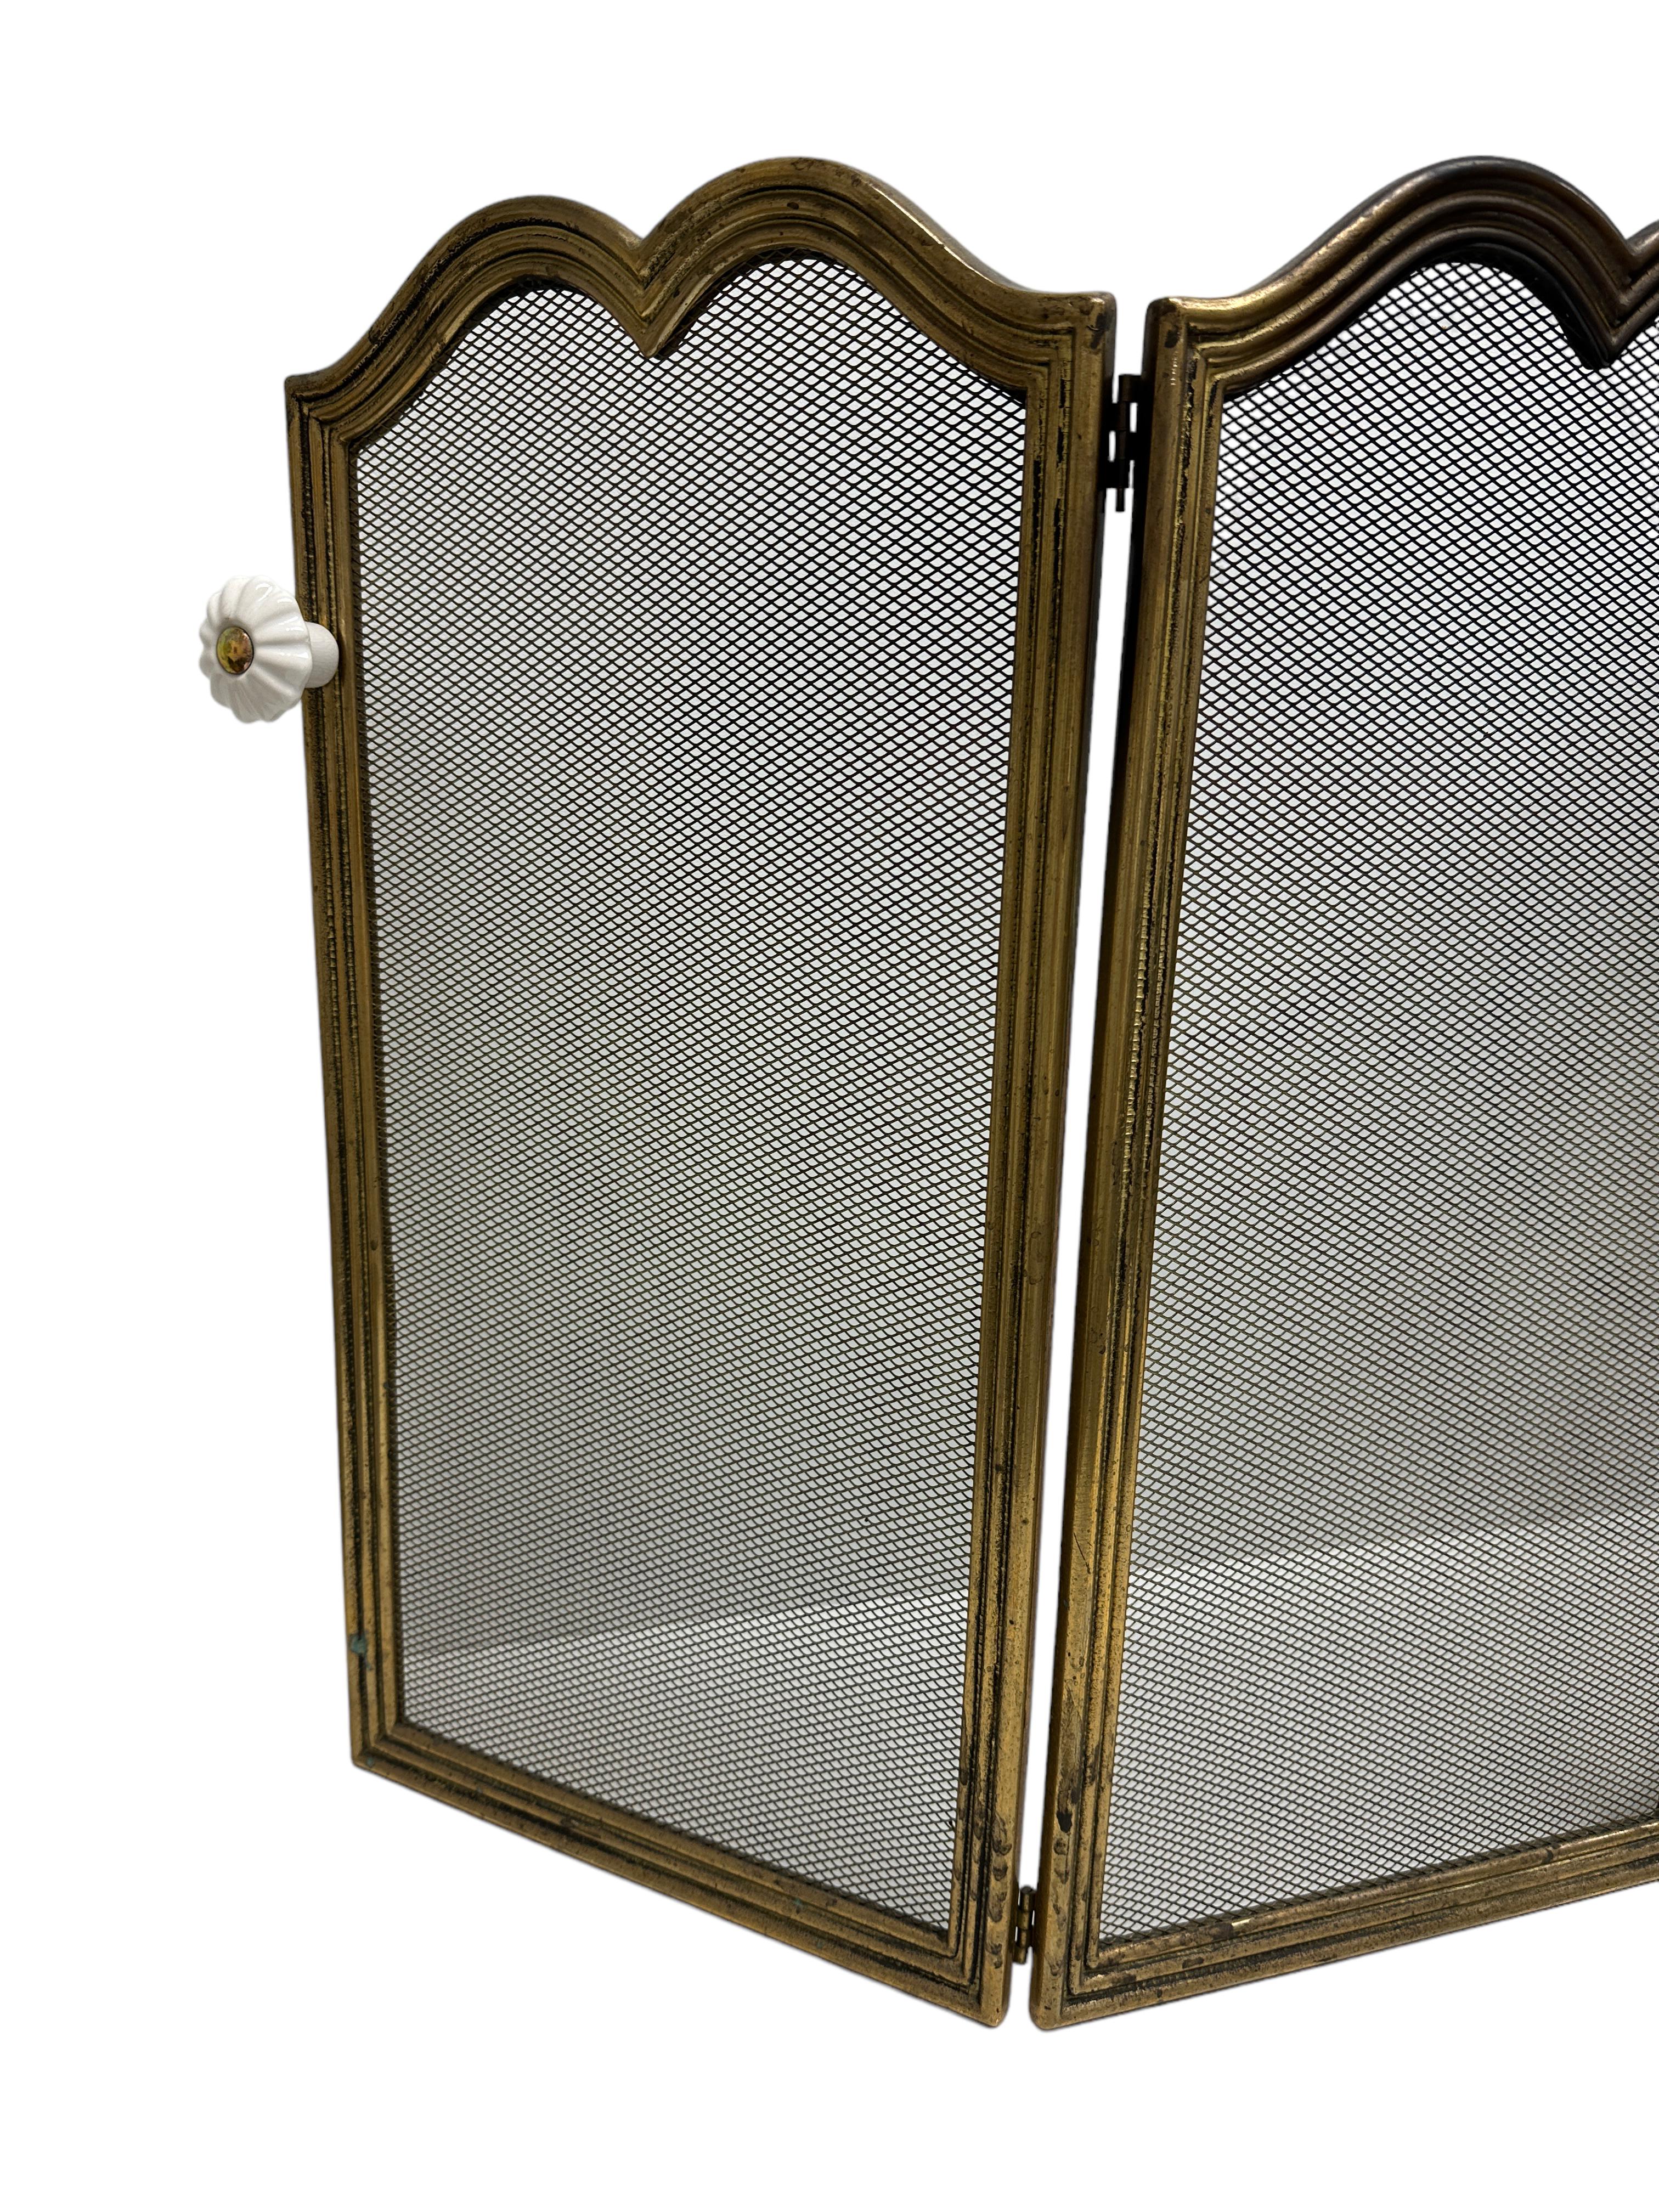 Hollywood Regency Brass and Iron Fireplace Screen, Vintage Italy, 1950s For Sale